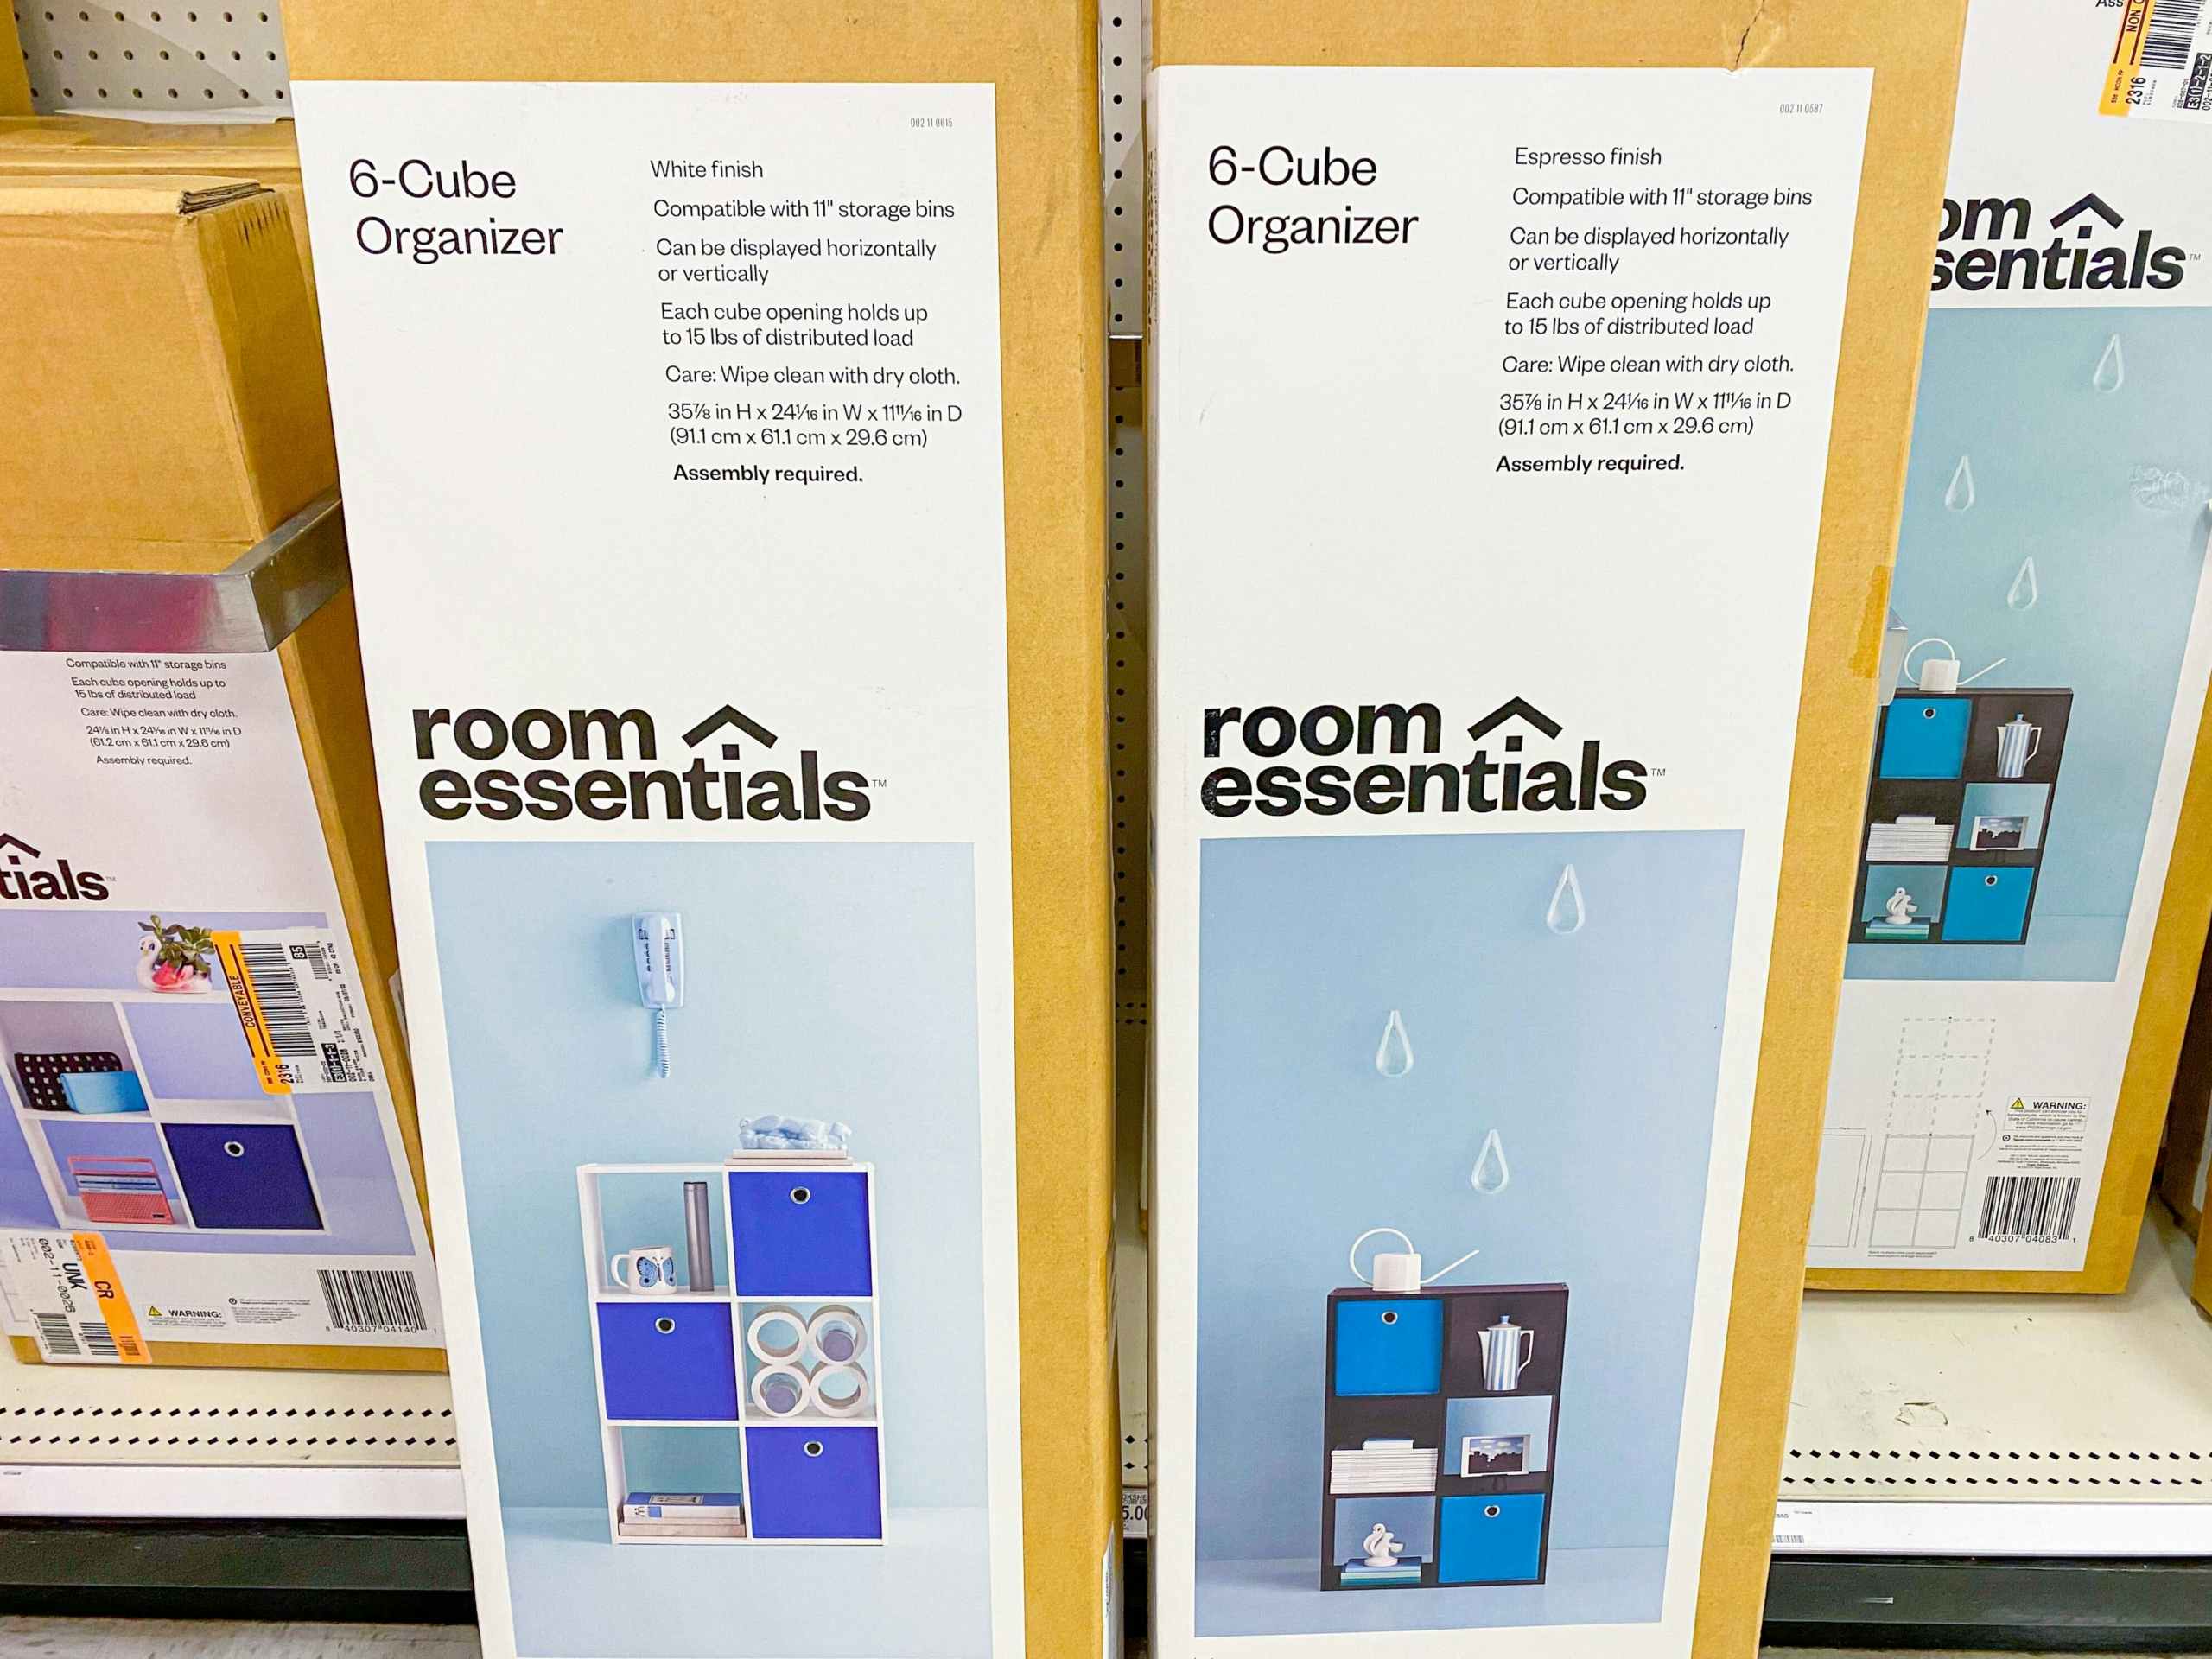 Two boxes for Room Essentials 6-Cube Organizers on the floor in front of the shelf at Target.